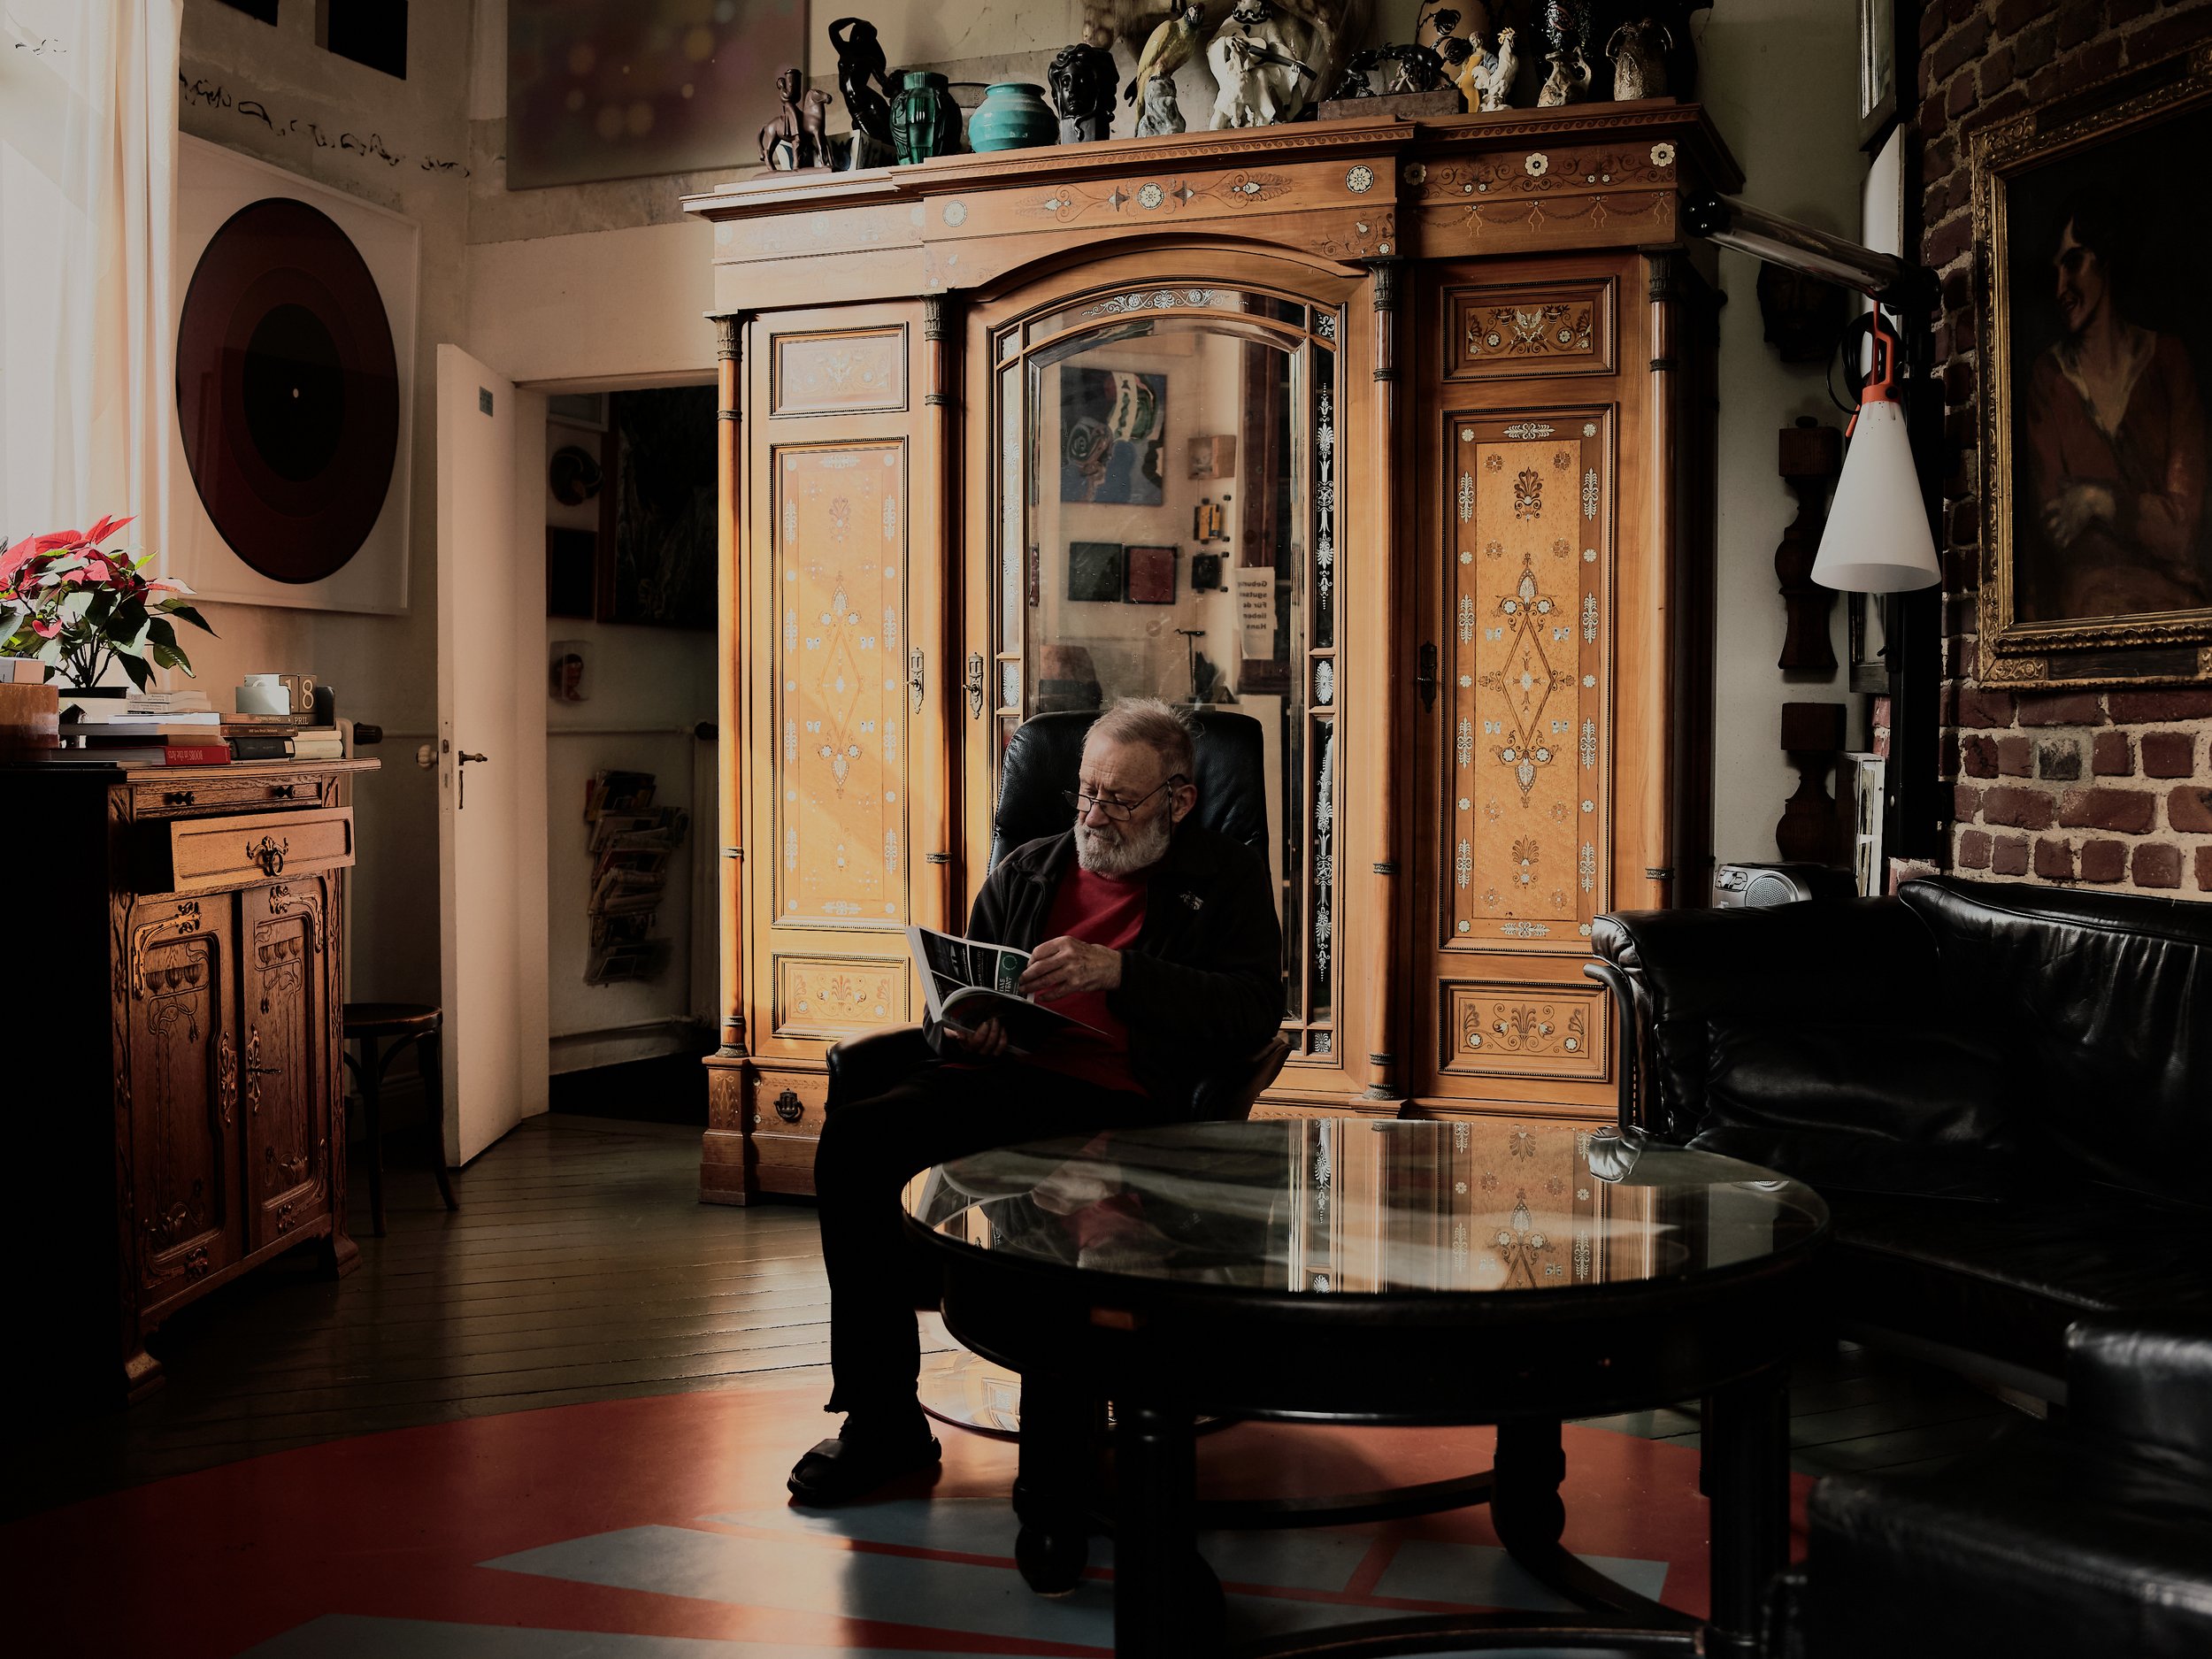  The 88-year-old Hans Börg grew up in Kronach in Upper Franconia. He worked as an art professor in Cologne and Duisburg. He likes to read in the living room on the ground floor.  